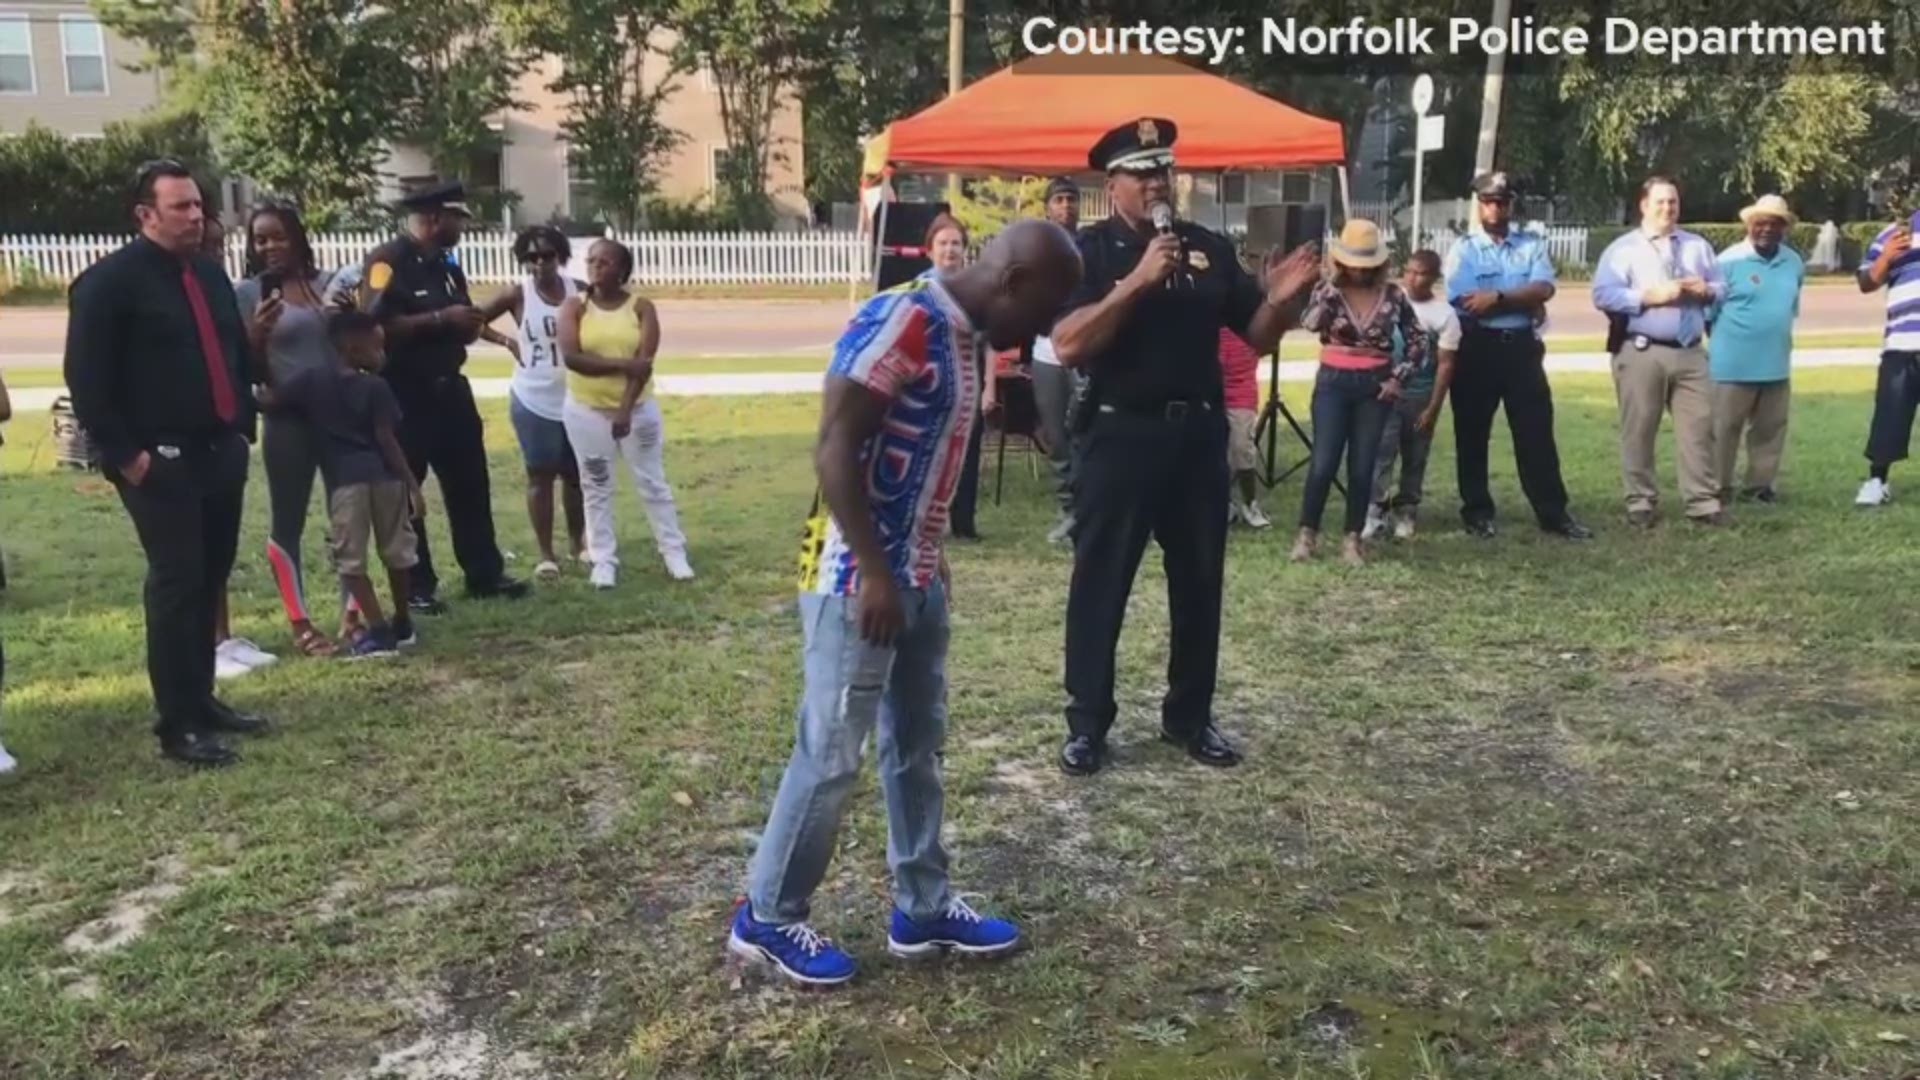 "If we love one another, we wouldn't be pulling these triggers," said Norfolk Police Chief Larry Boone at the department's fourth "Guns Down" community gathering.